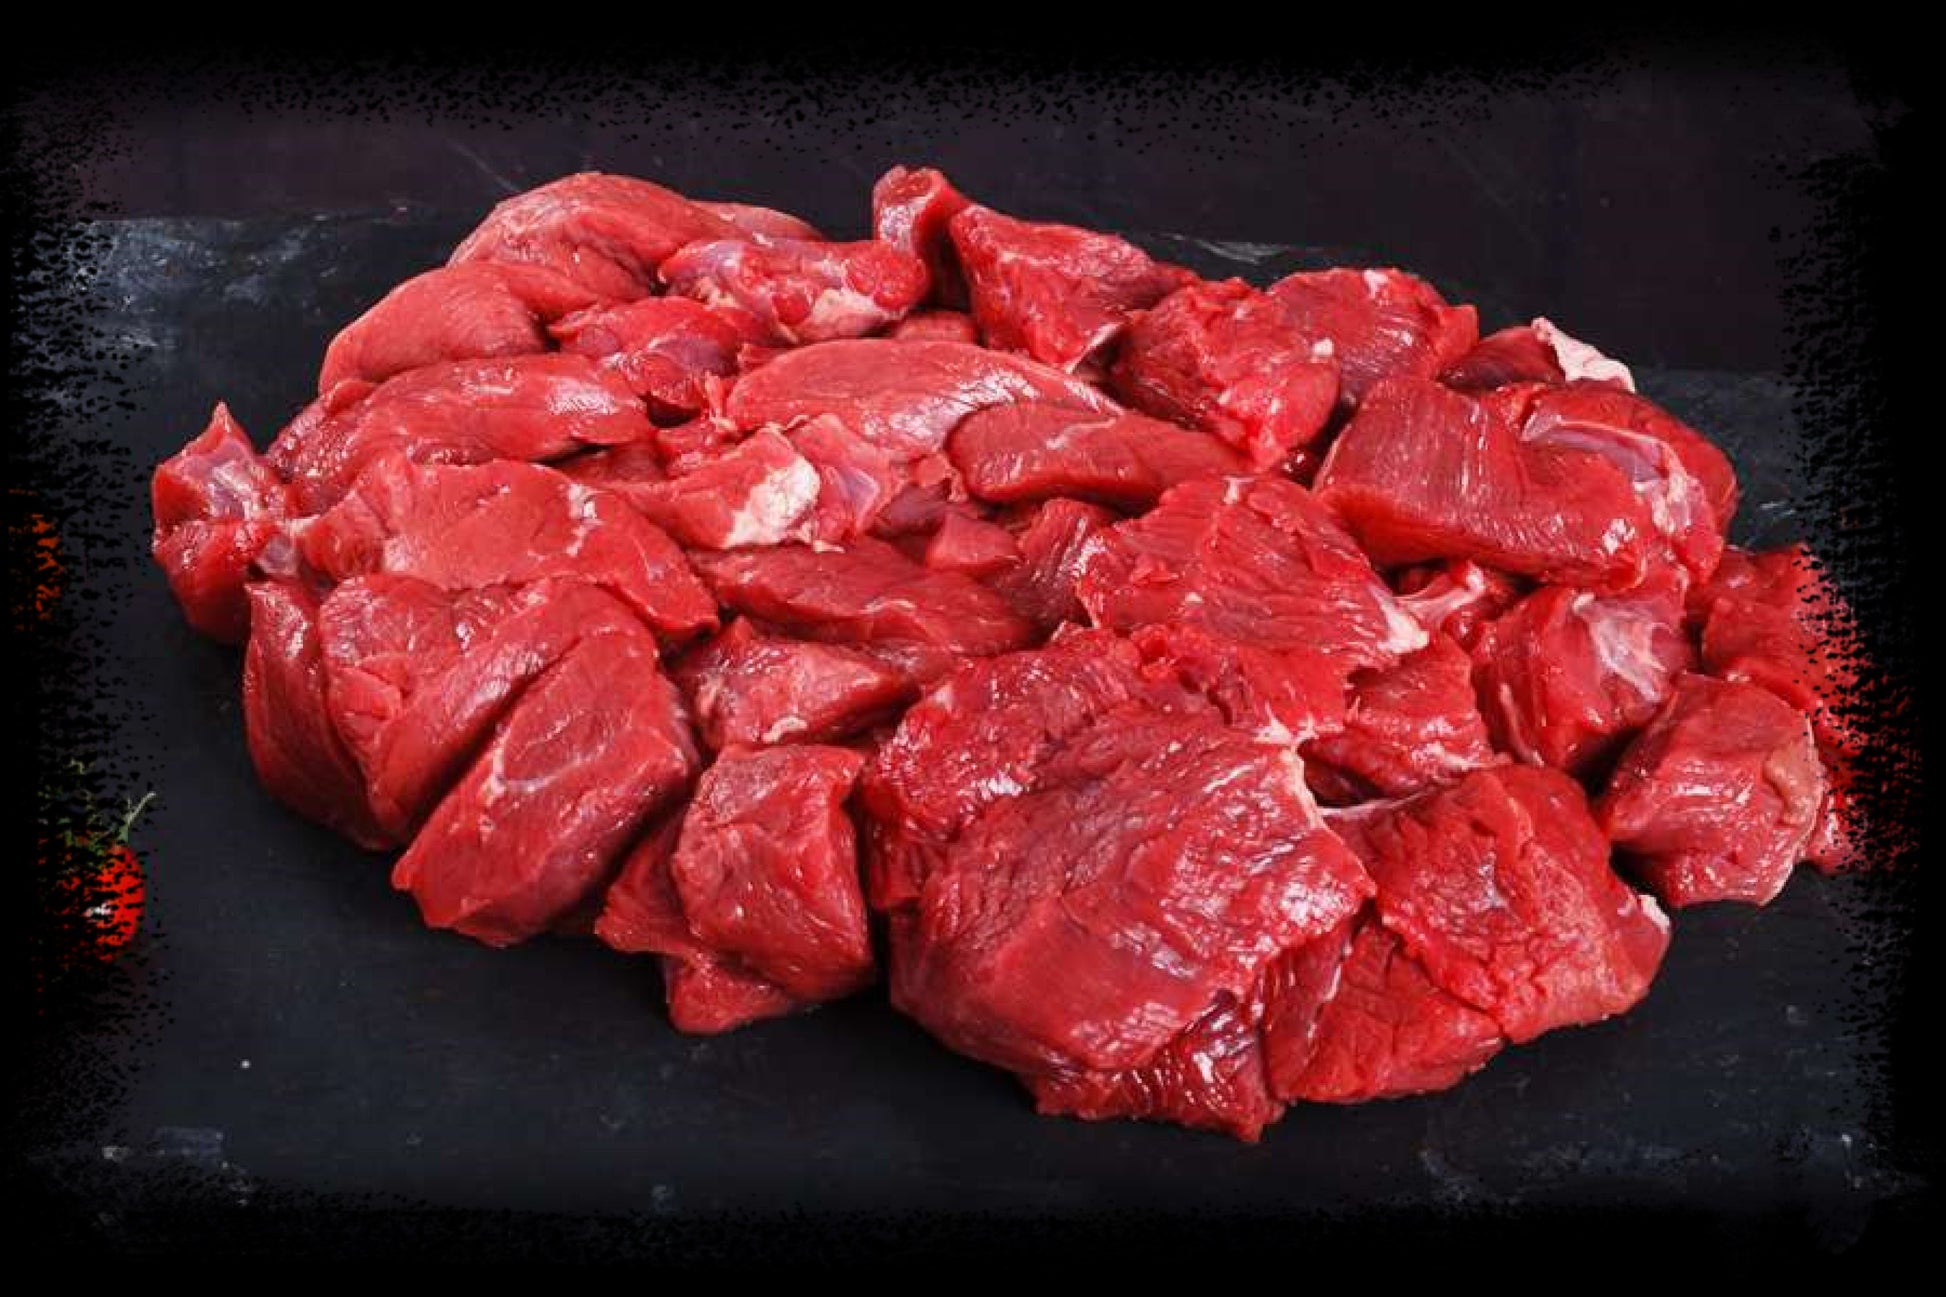 Grass-Fed Beef Cubes, Australia (Dhs 48.90/kg) - Chilled